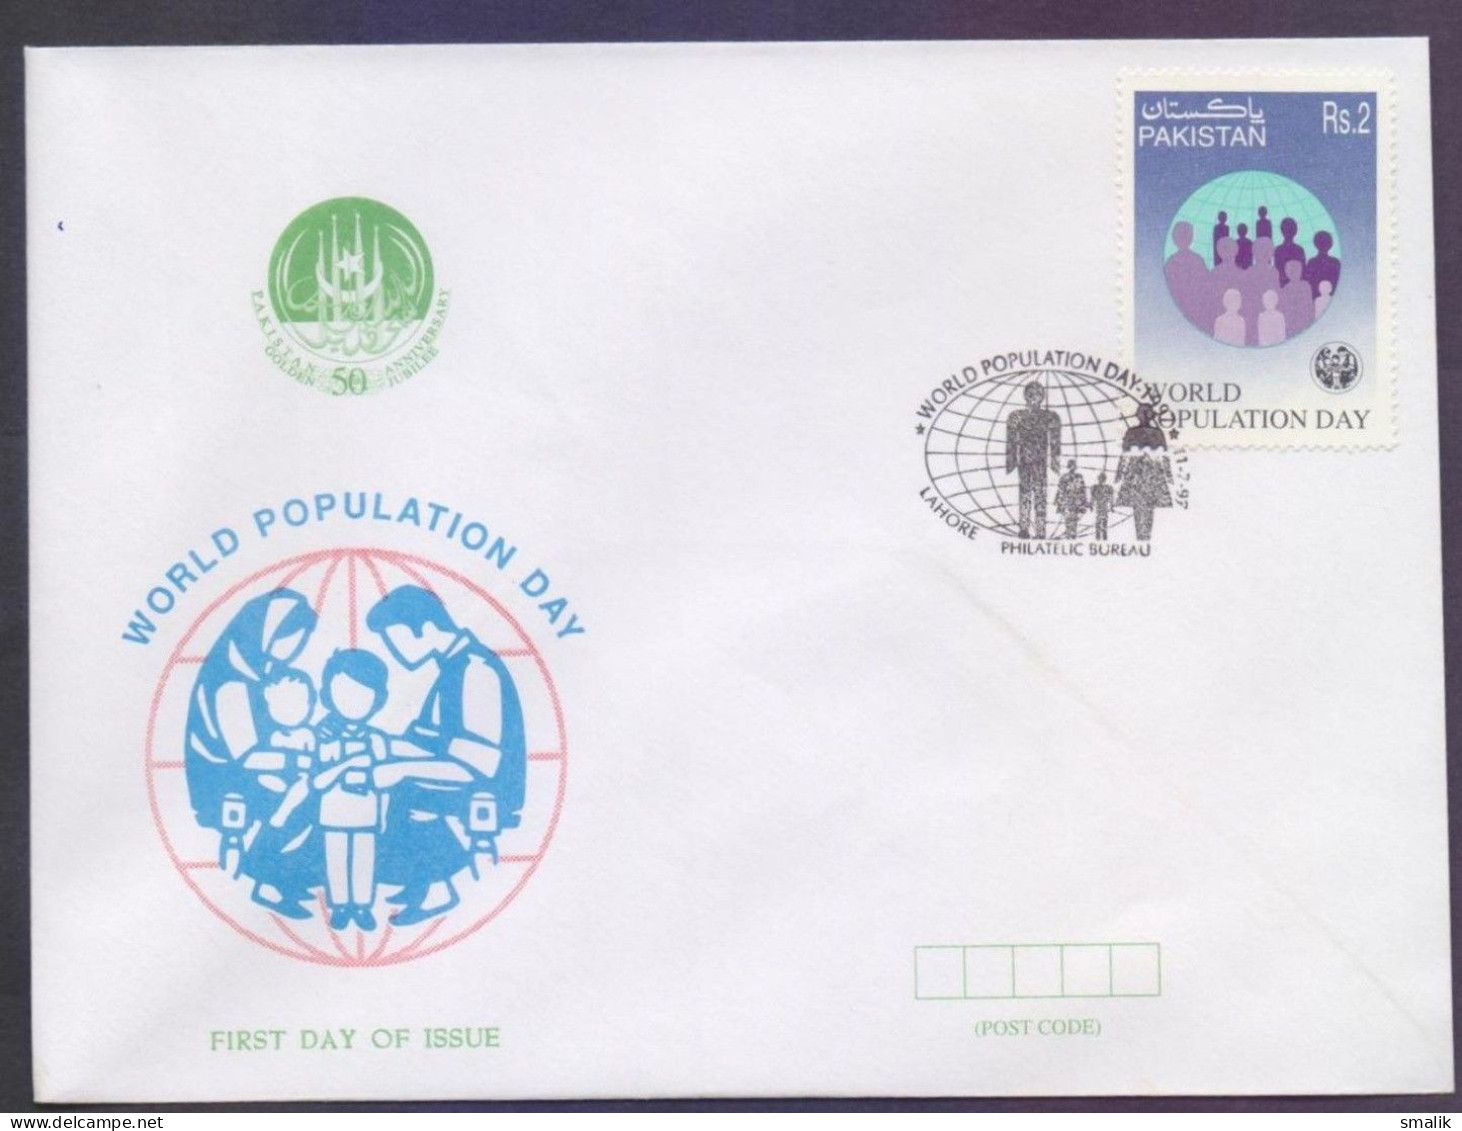 PAKISTAN 1997 FDC - World Population Day, First Day Cover - Pakistan